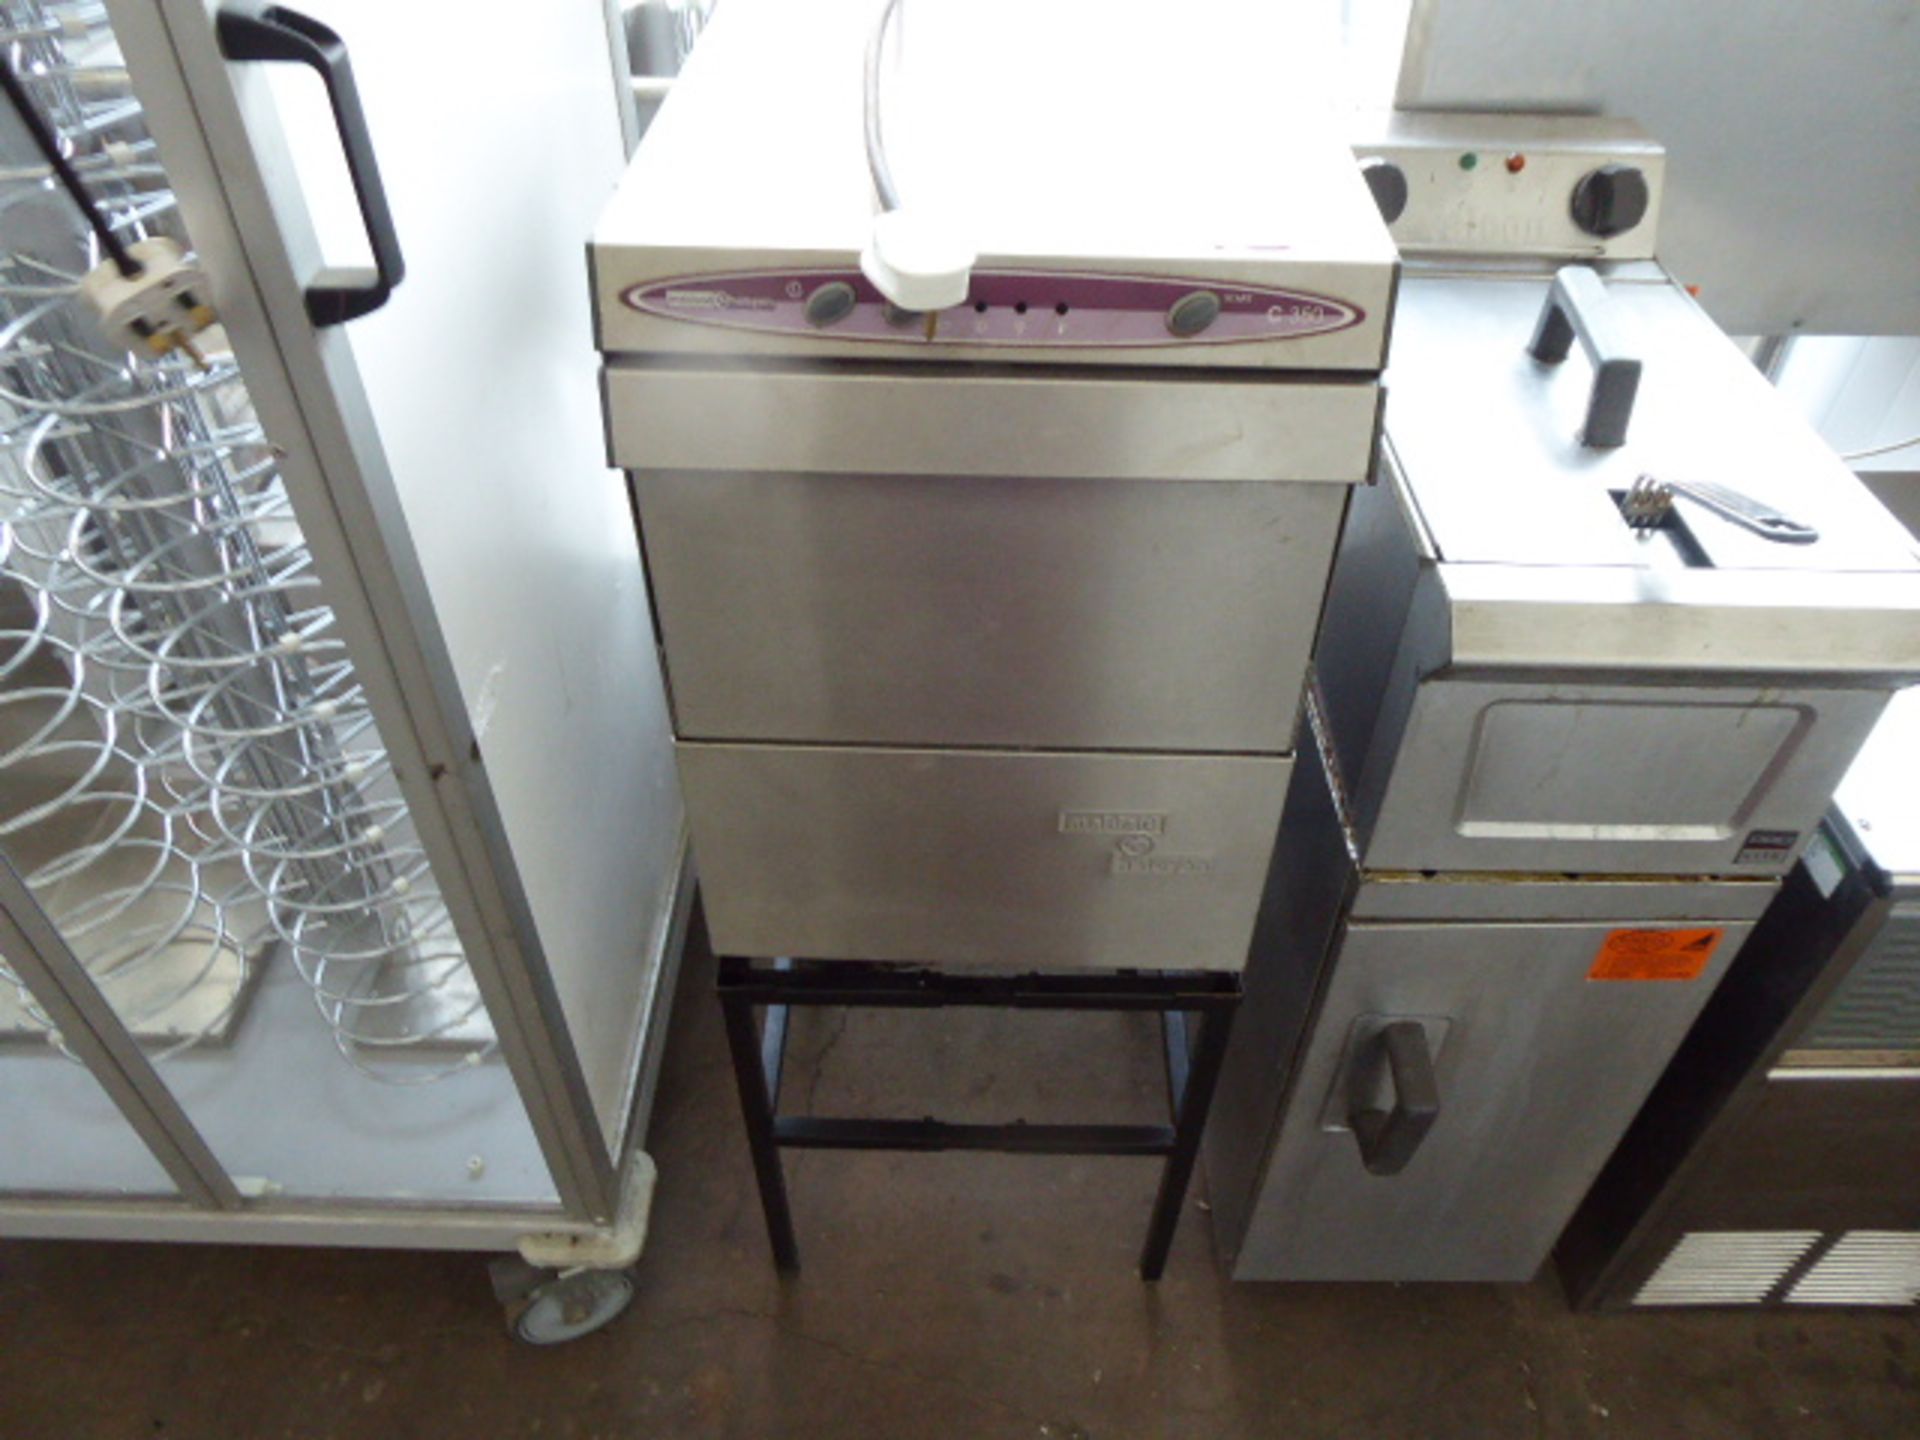 (FAIL) 40cm MaidAid Halcyon C350 glass washer with stand